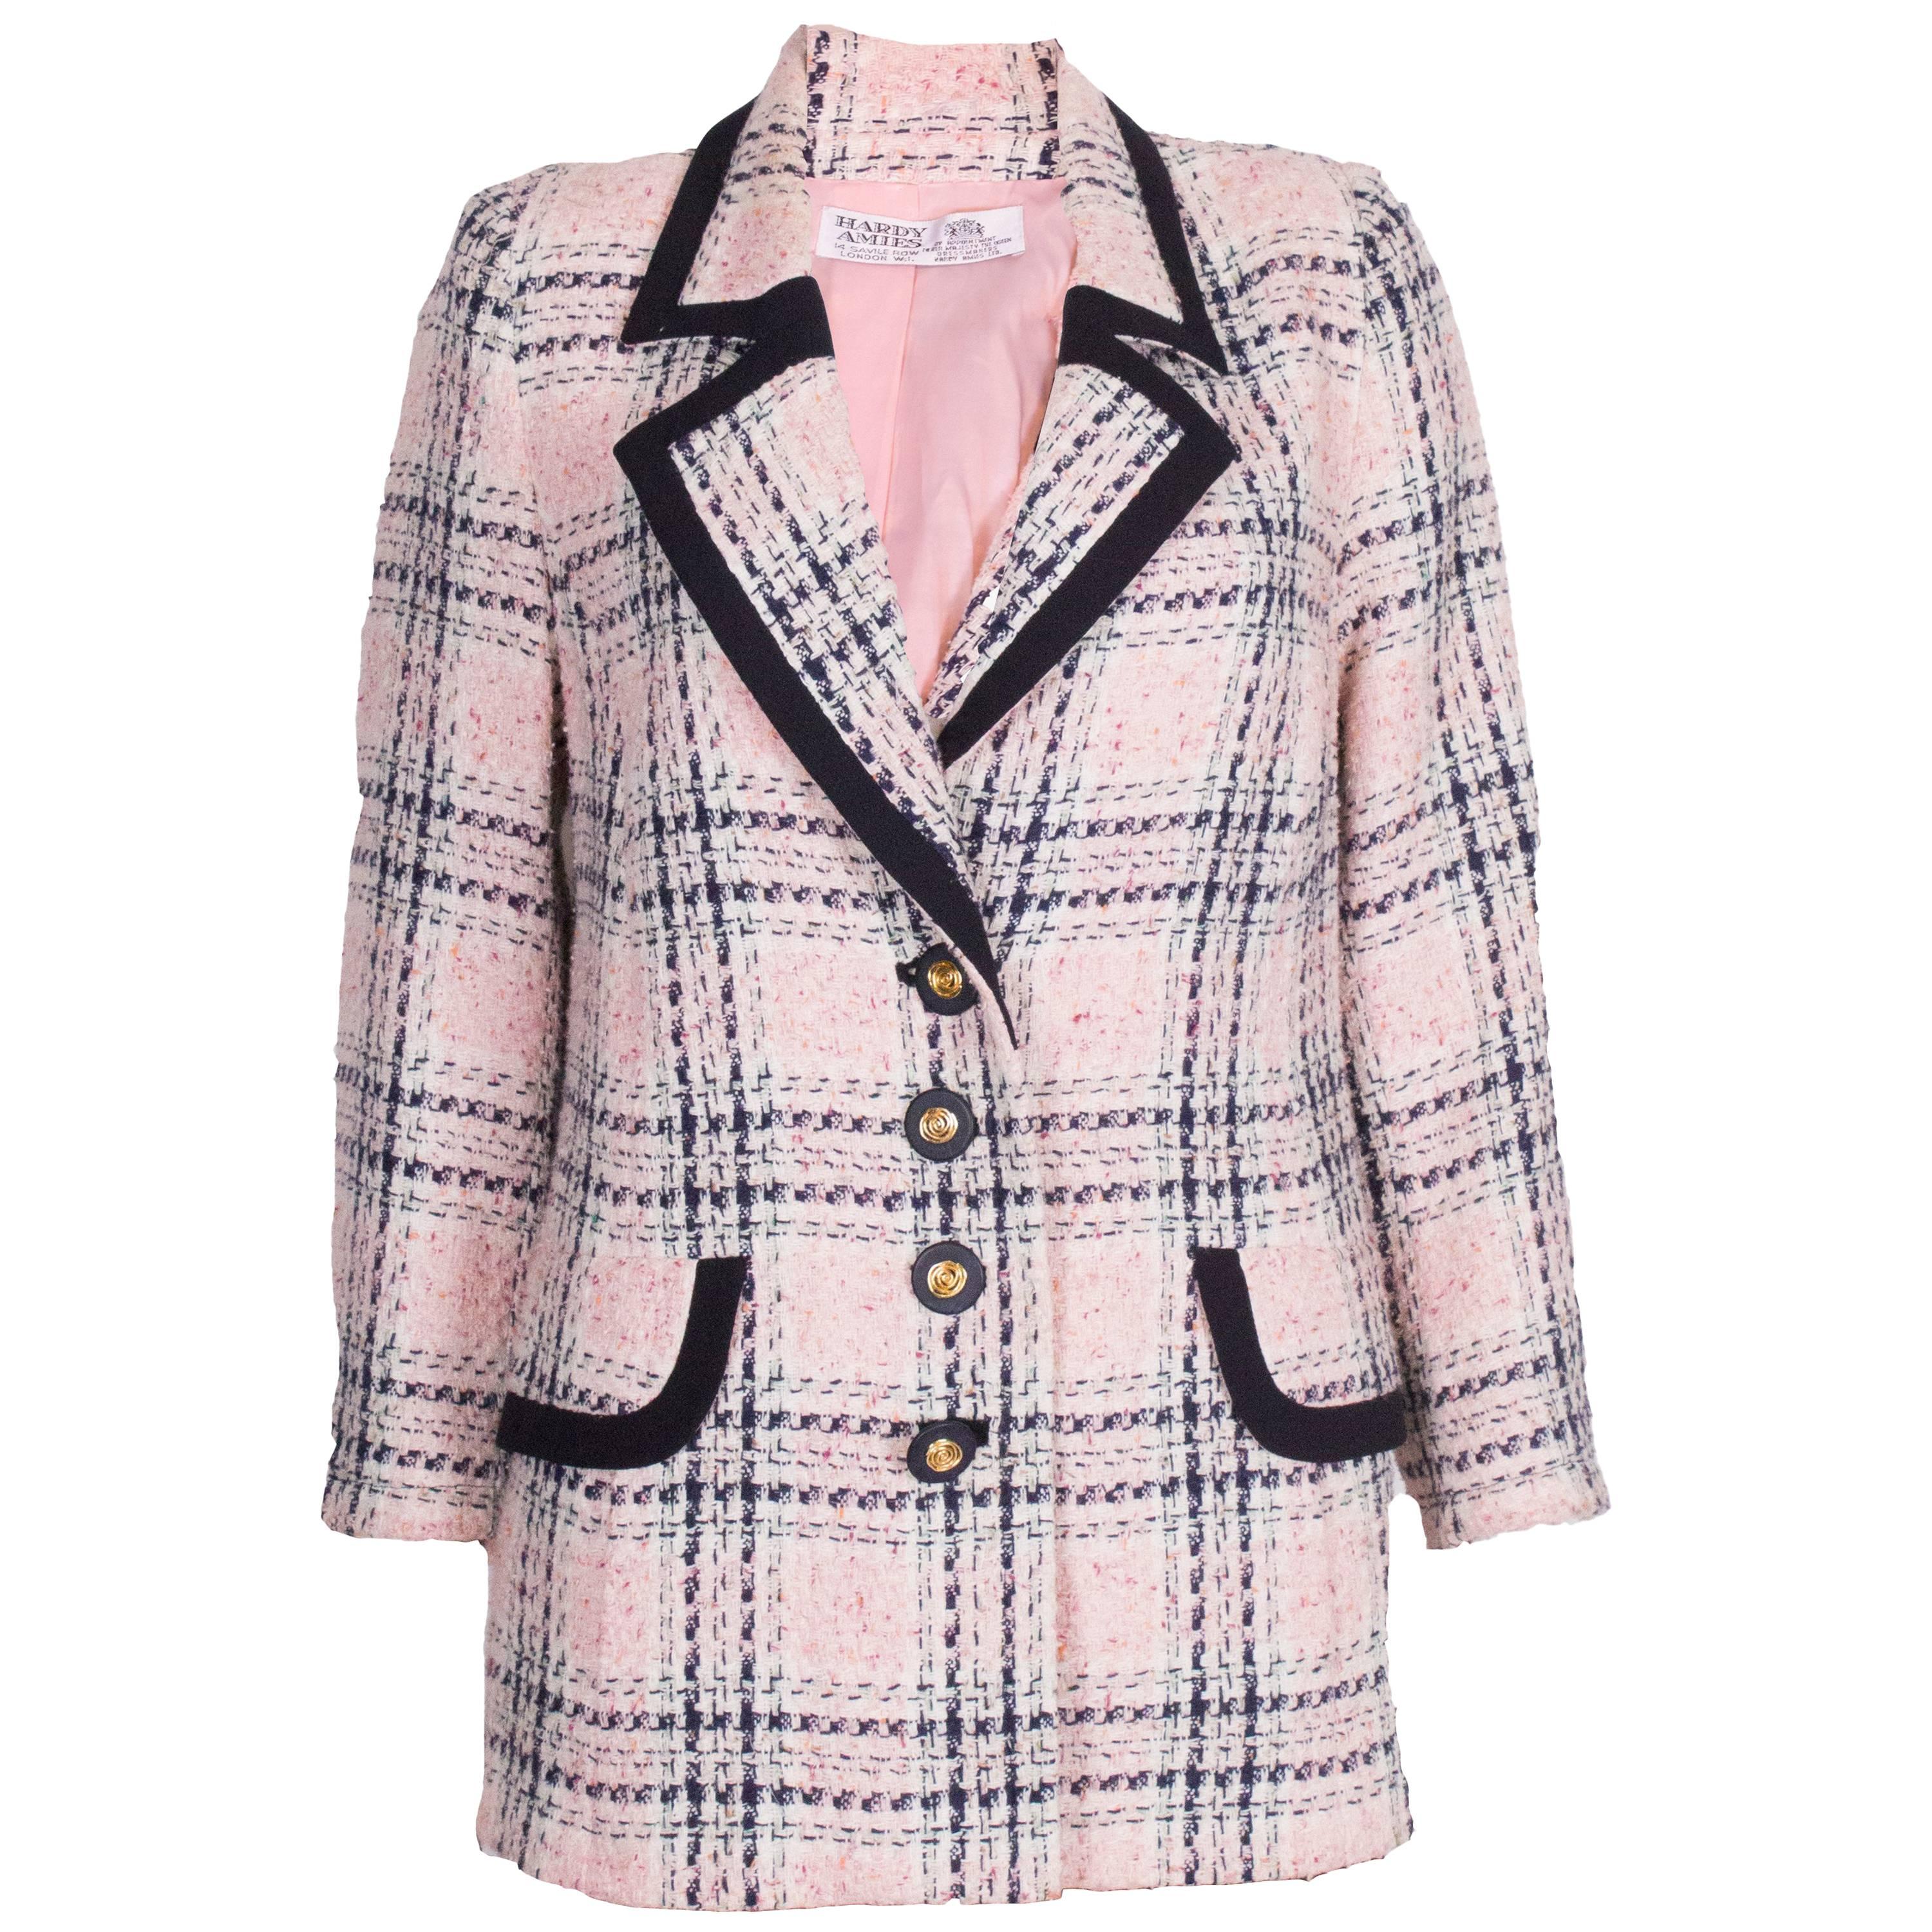 Hardy Amies Pink, Cream and Blue Jacket